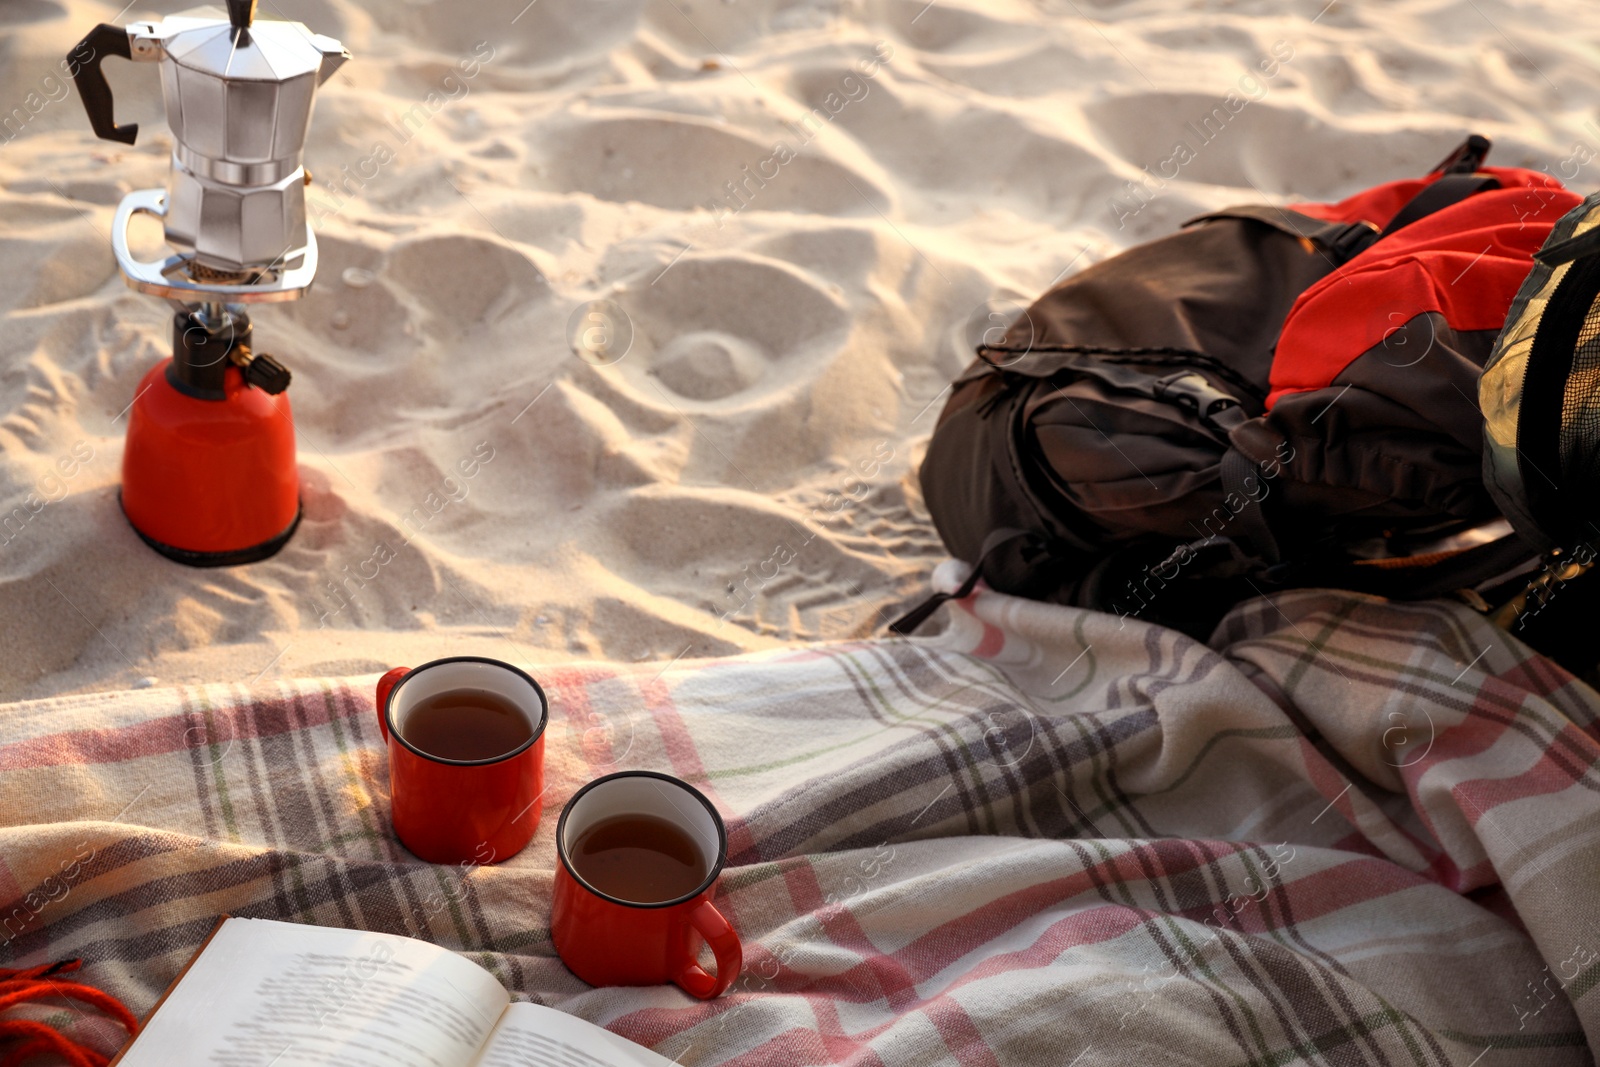 Photo of Cups of tea, book on blanket near camping stove with moka pot and backpack at sandy beach